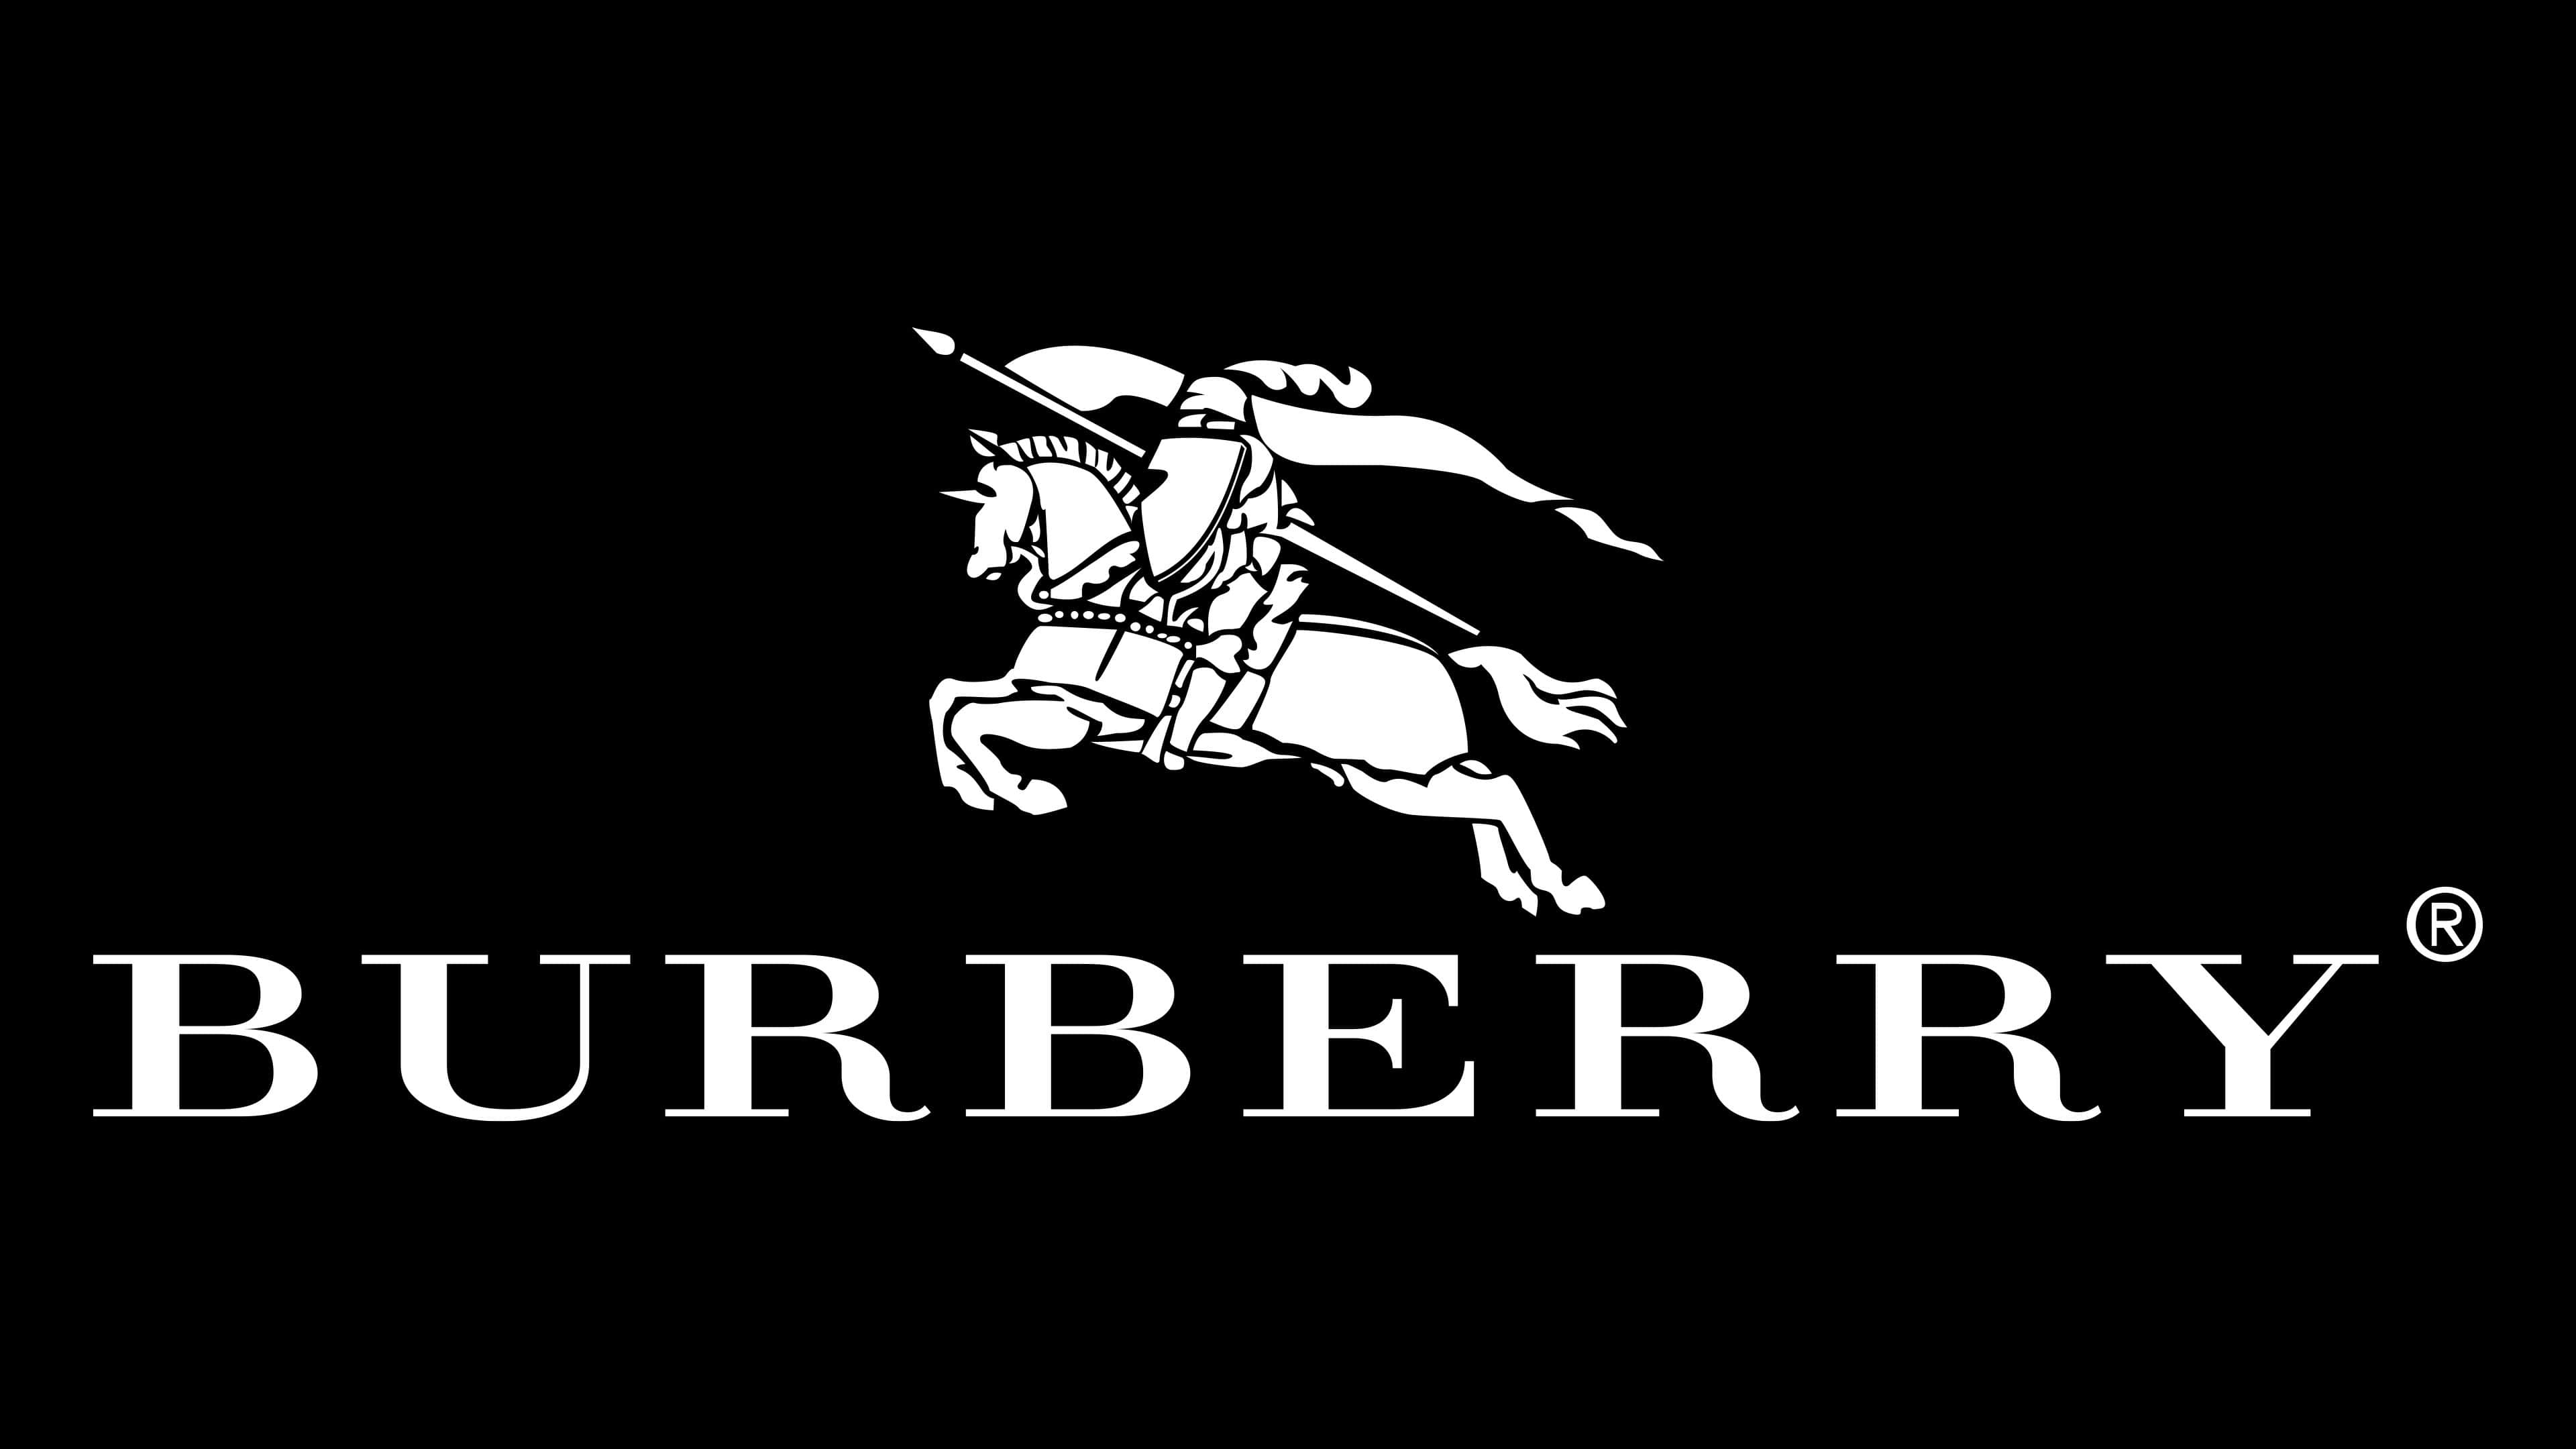 Burberry: A manufacturer and marketer of men's, women's, and children's apparel, Black and white. 3840x2160 4K Wallpaper.